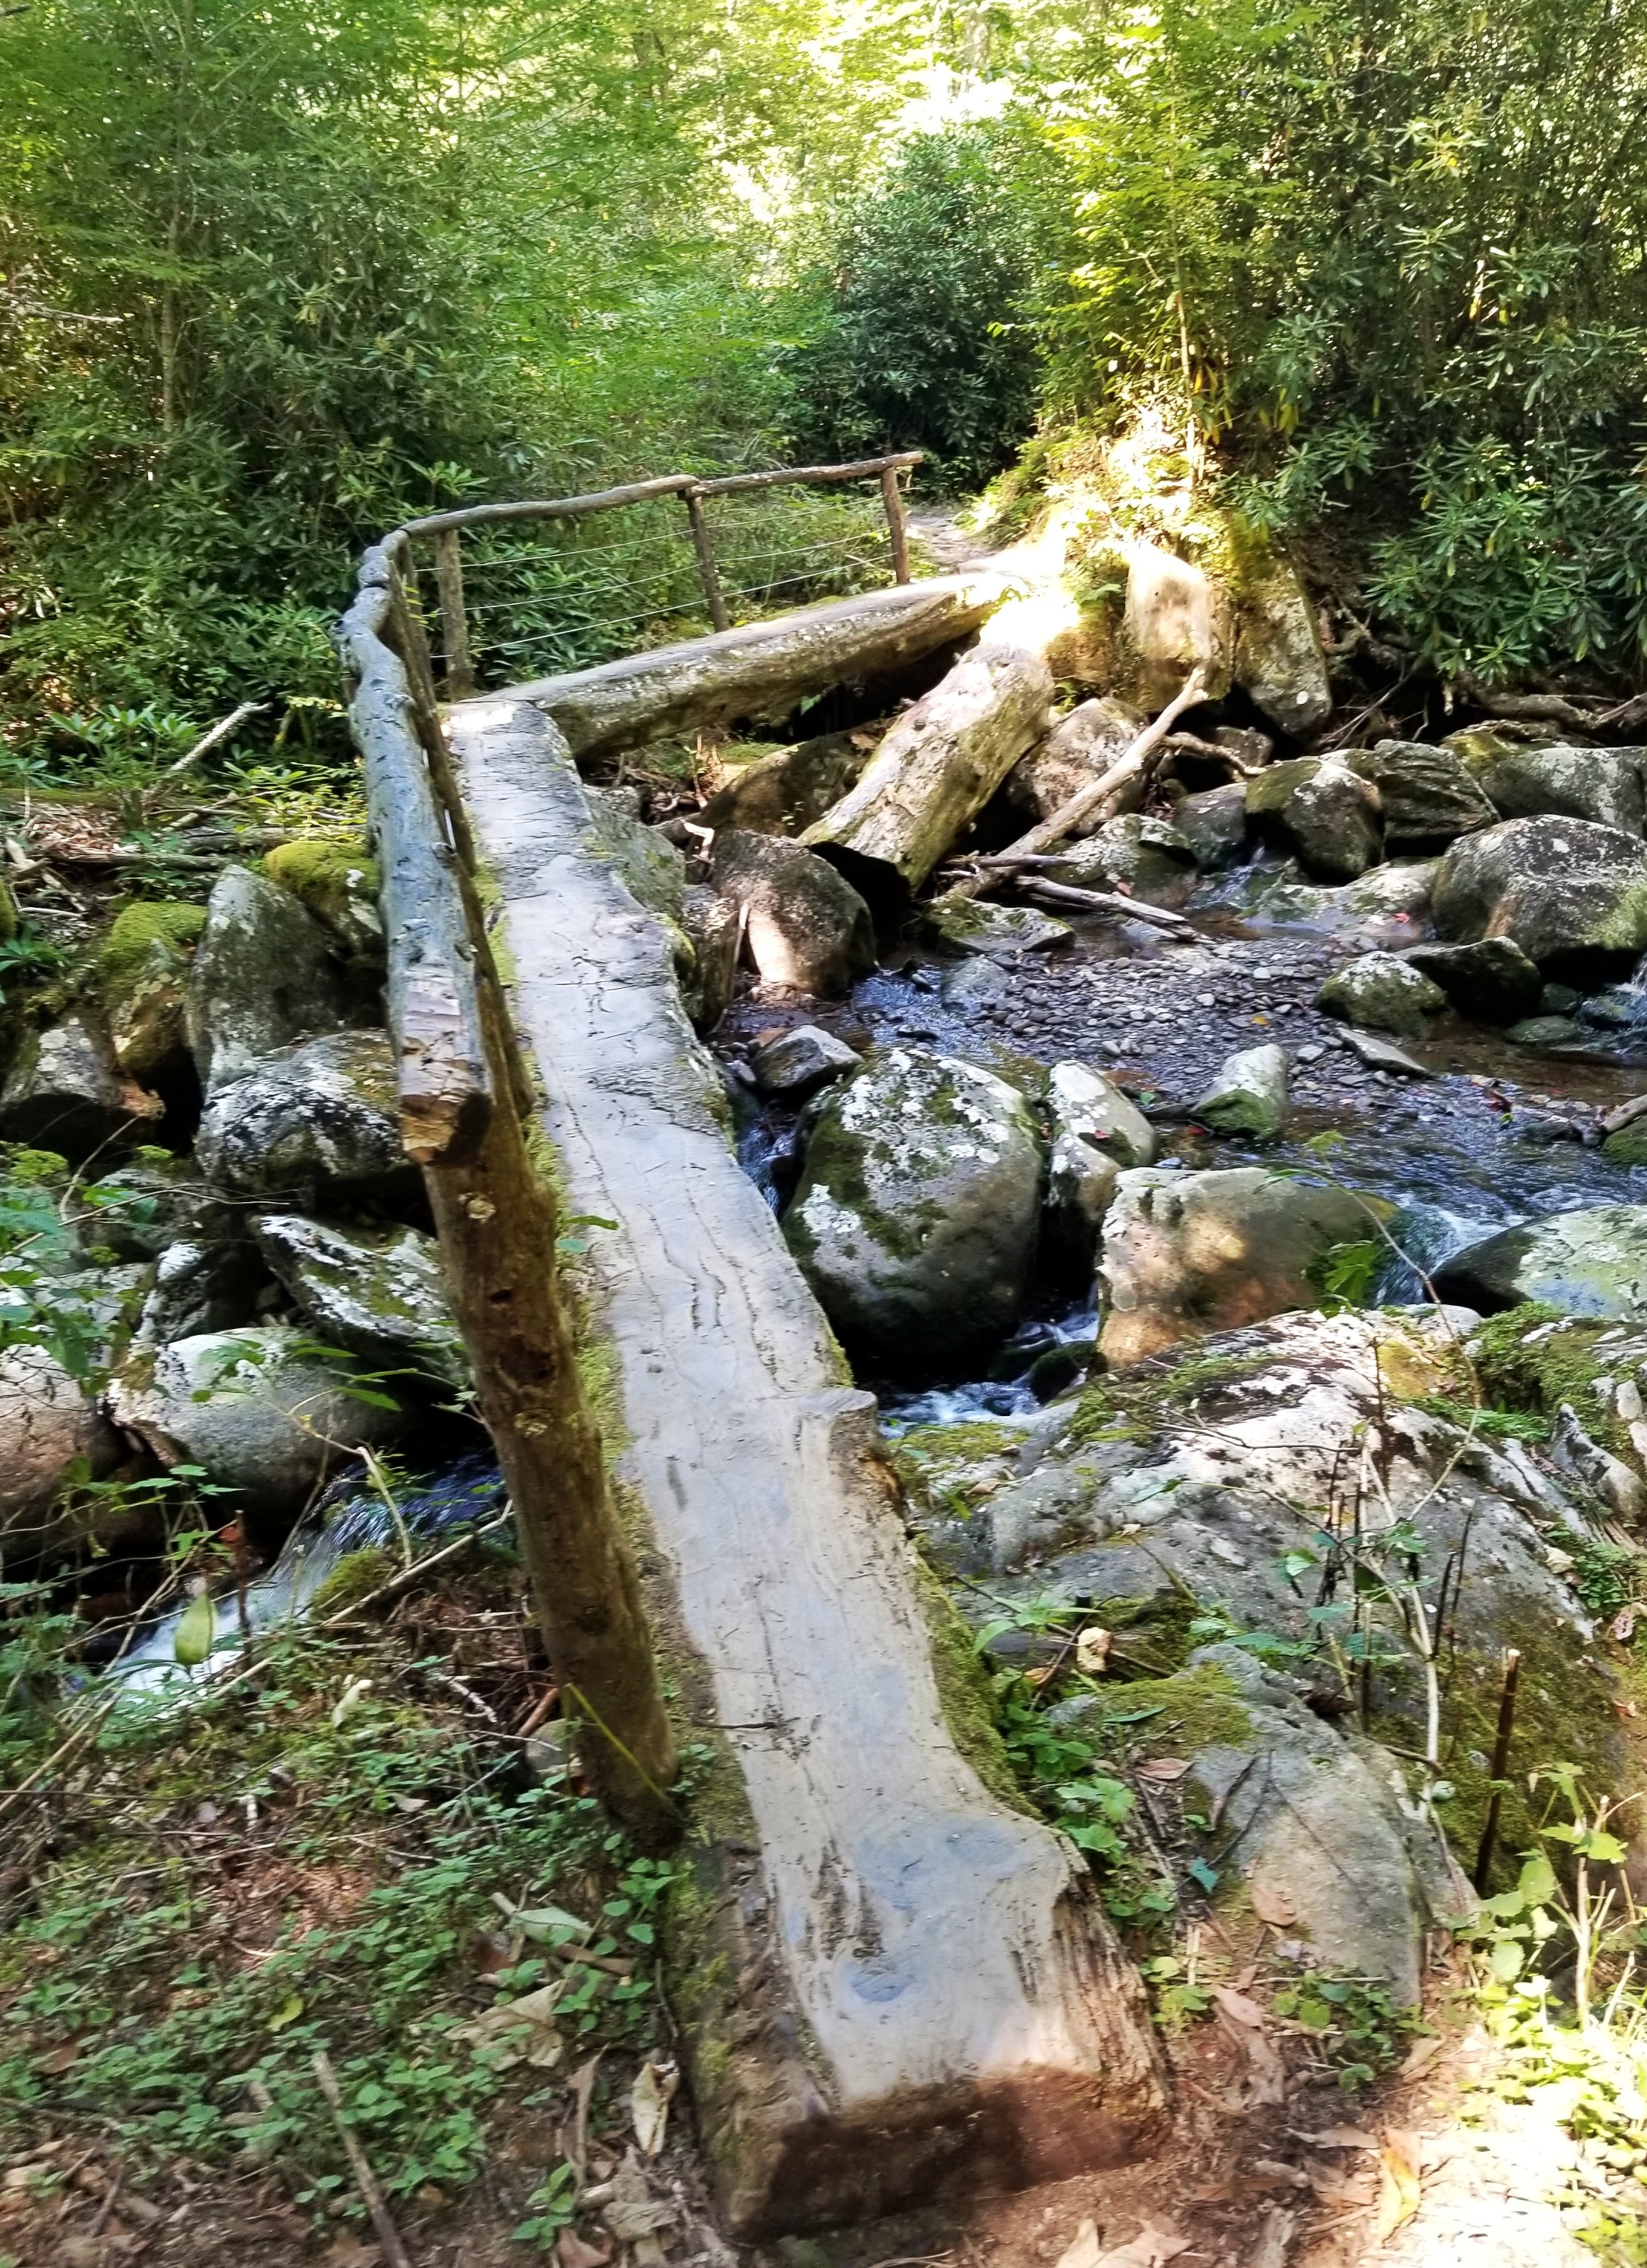 Wooden, narrow bridge over a river on a hiking trail